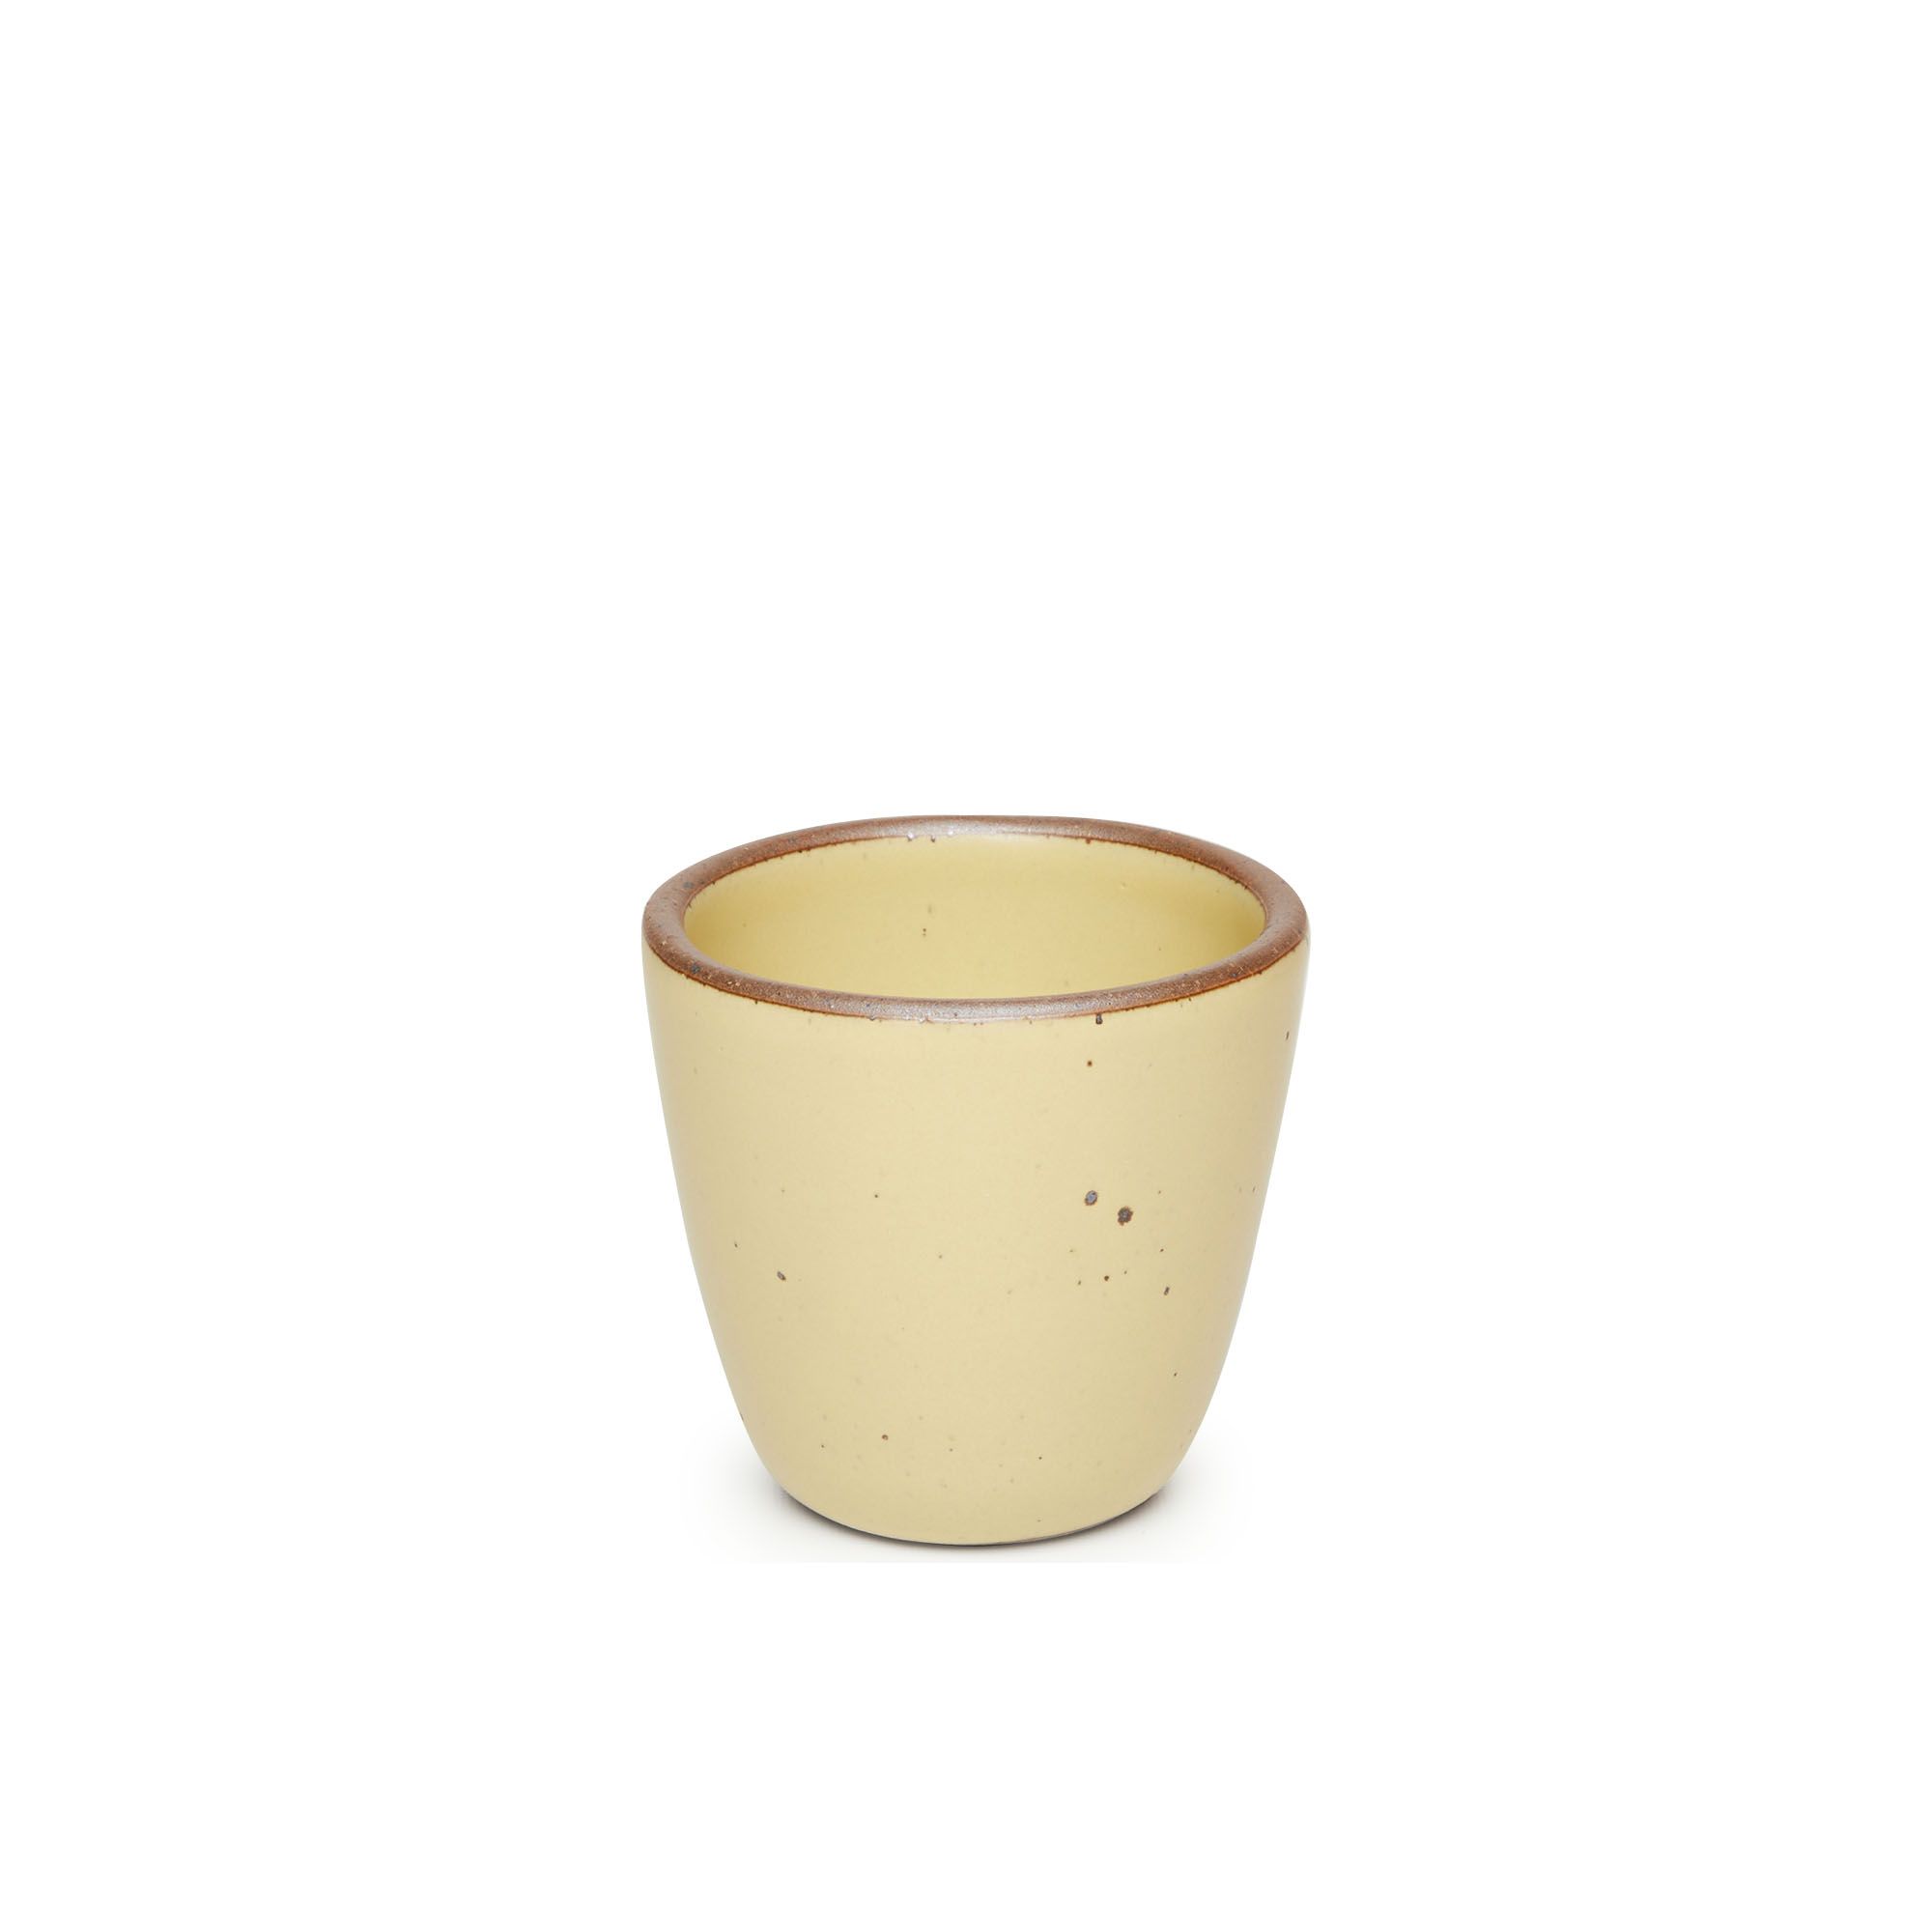 A short cup that tapers out to get wider at the top in a light butter yellow color featuring iron speckles